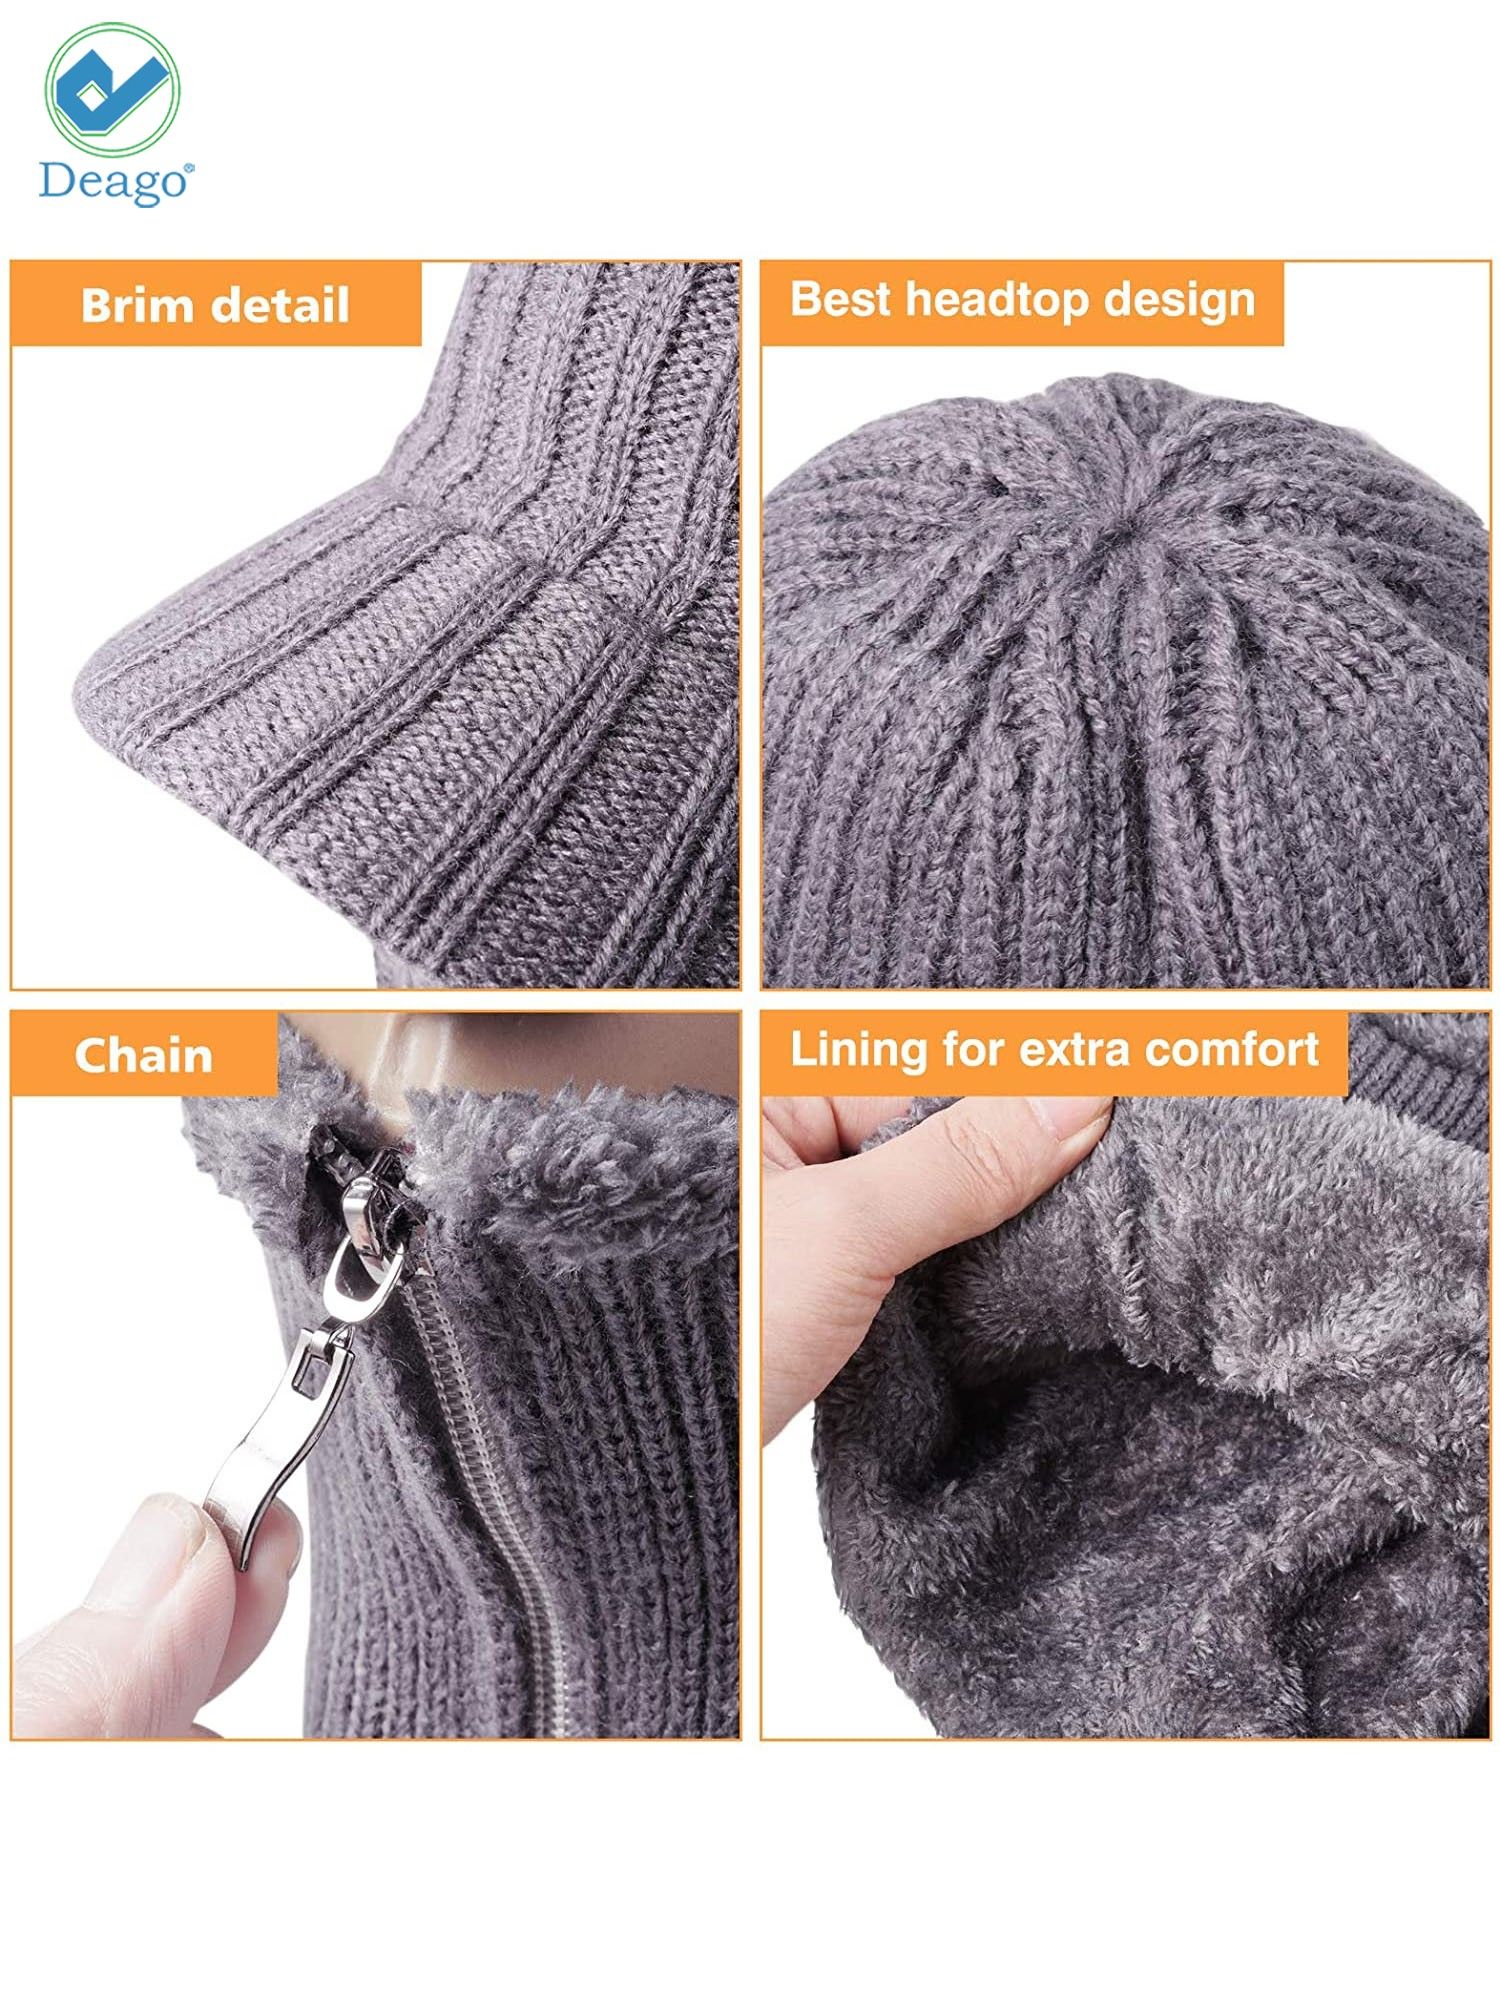 Deago Men Winter Knitted Balaclava Beanie Hat Scarf Set Warm Cycling Ski Mask Neck Warmer with Thick Fleece Lined Zipper Winter Hat & Scarf (Gray) - image 5 of 8